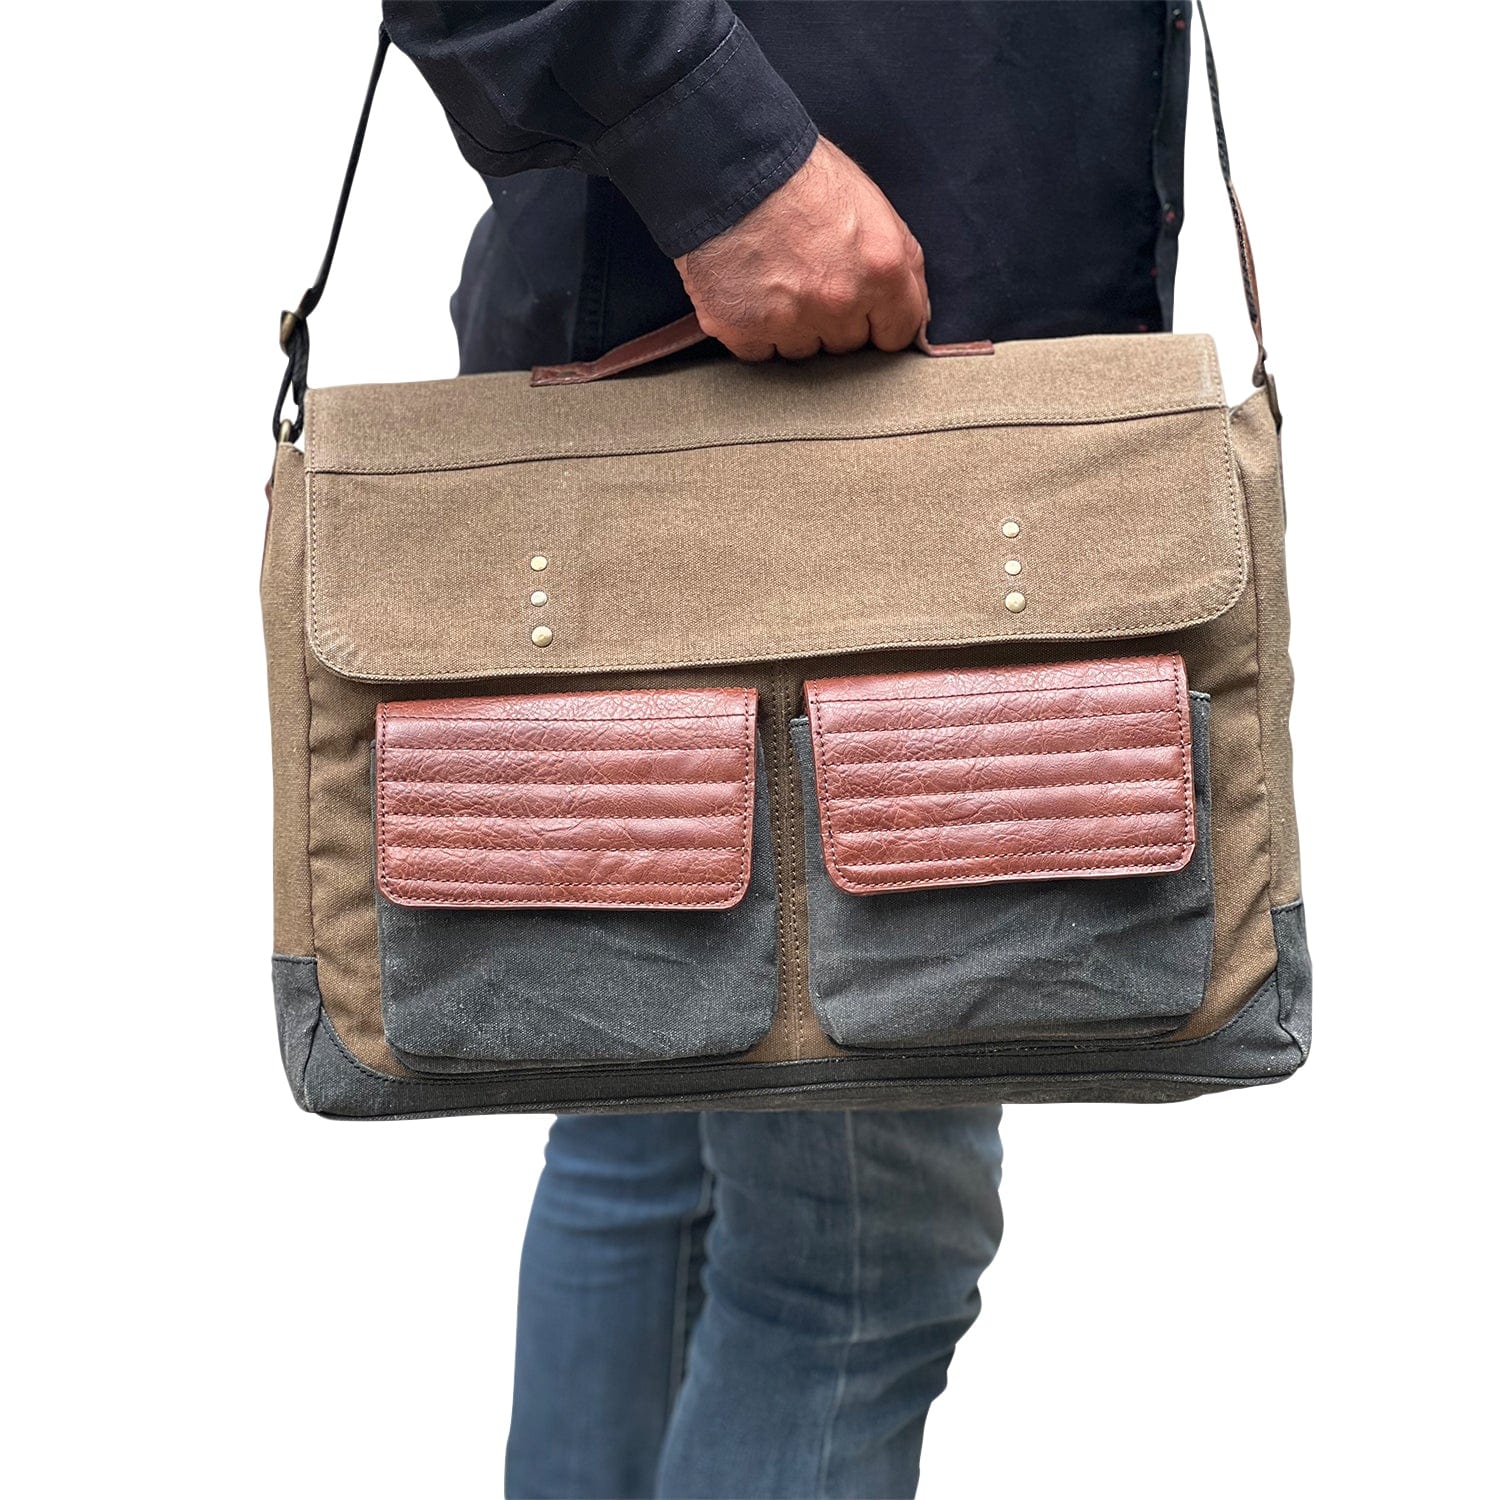 Mona B Upcycled Canvas Messenger Crossbody Laptop Bag for Upto 14" Laptop/Mac Book/Tablet with Stylish Design for Men and Women: Brad - Messenger by Mona-B - Backpack, EOSS, Flash Sale, Flat70, Sale, Shop2999, Shop3999